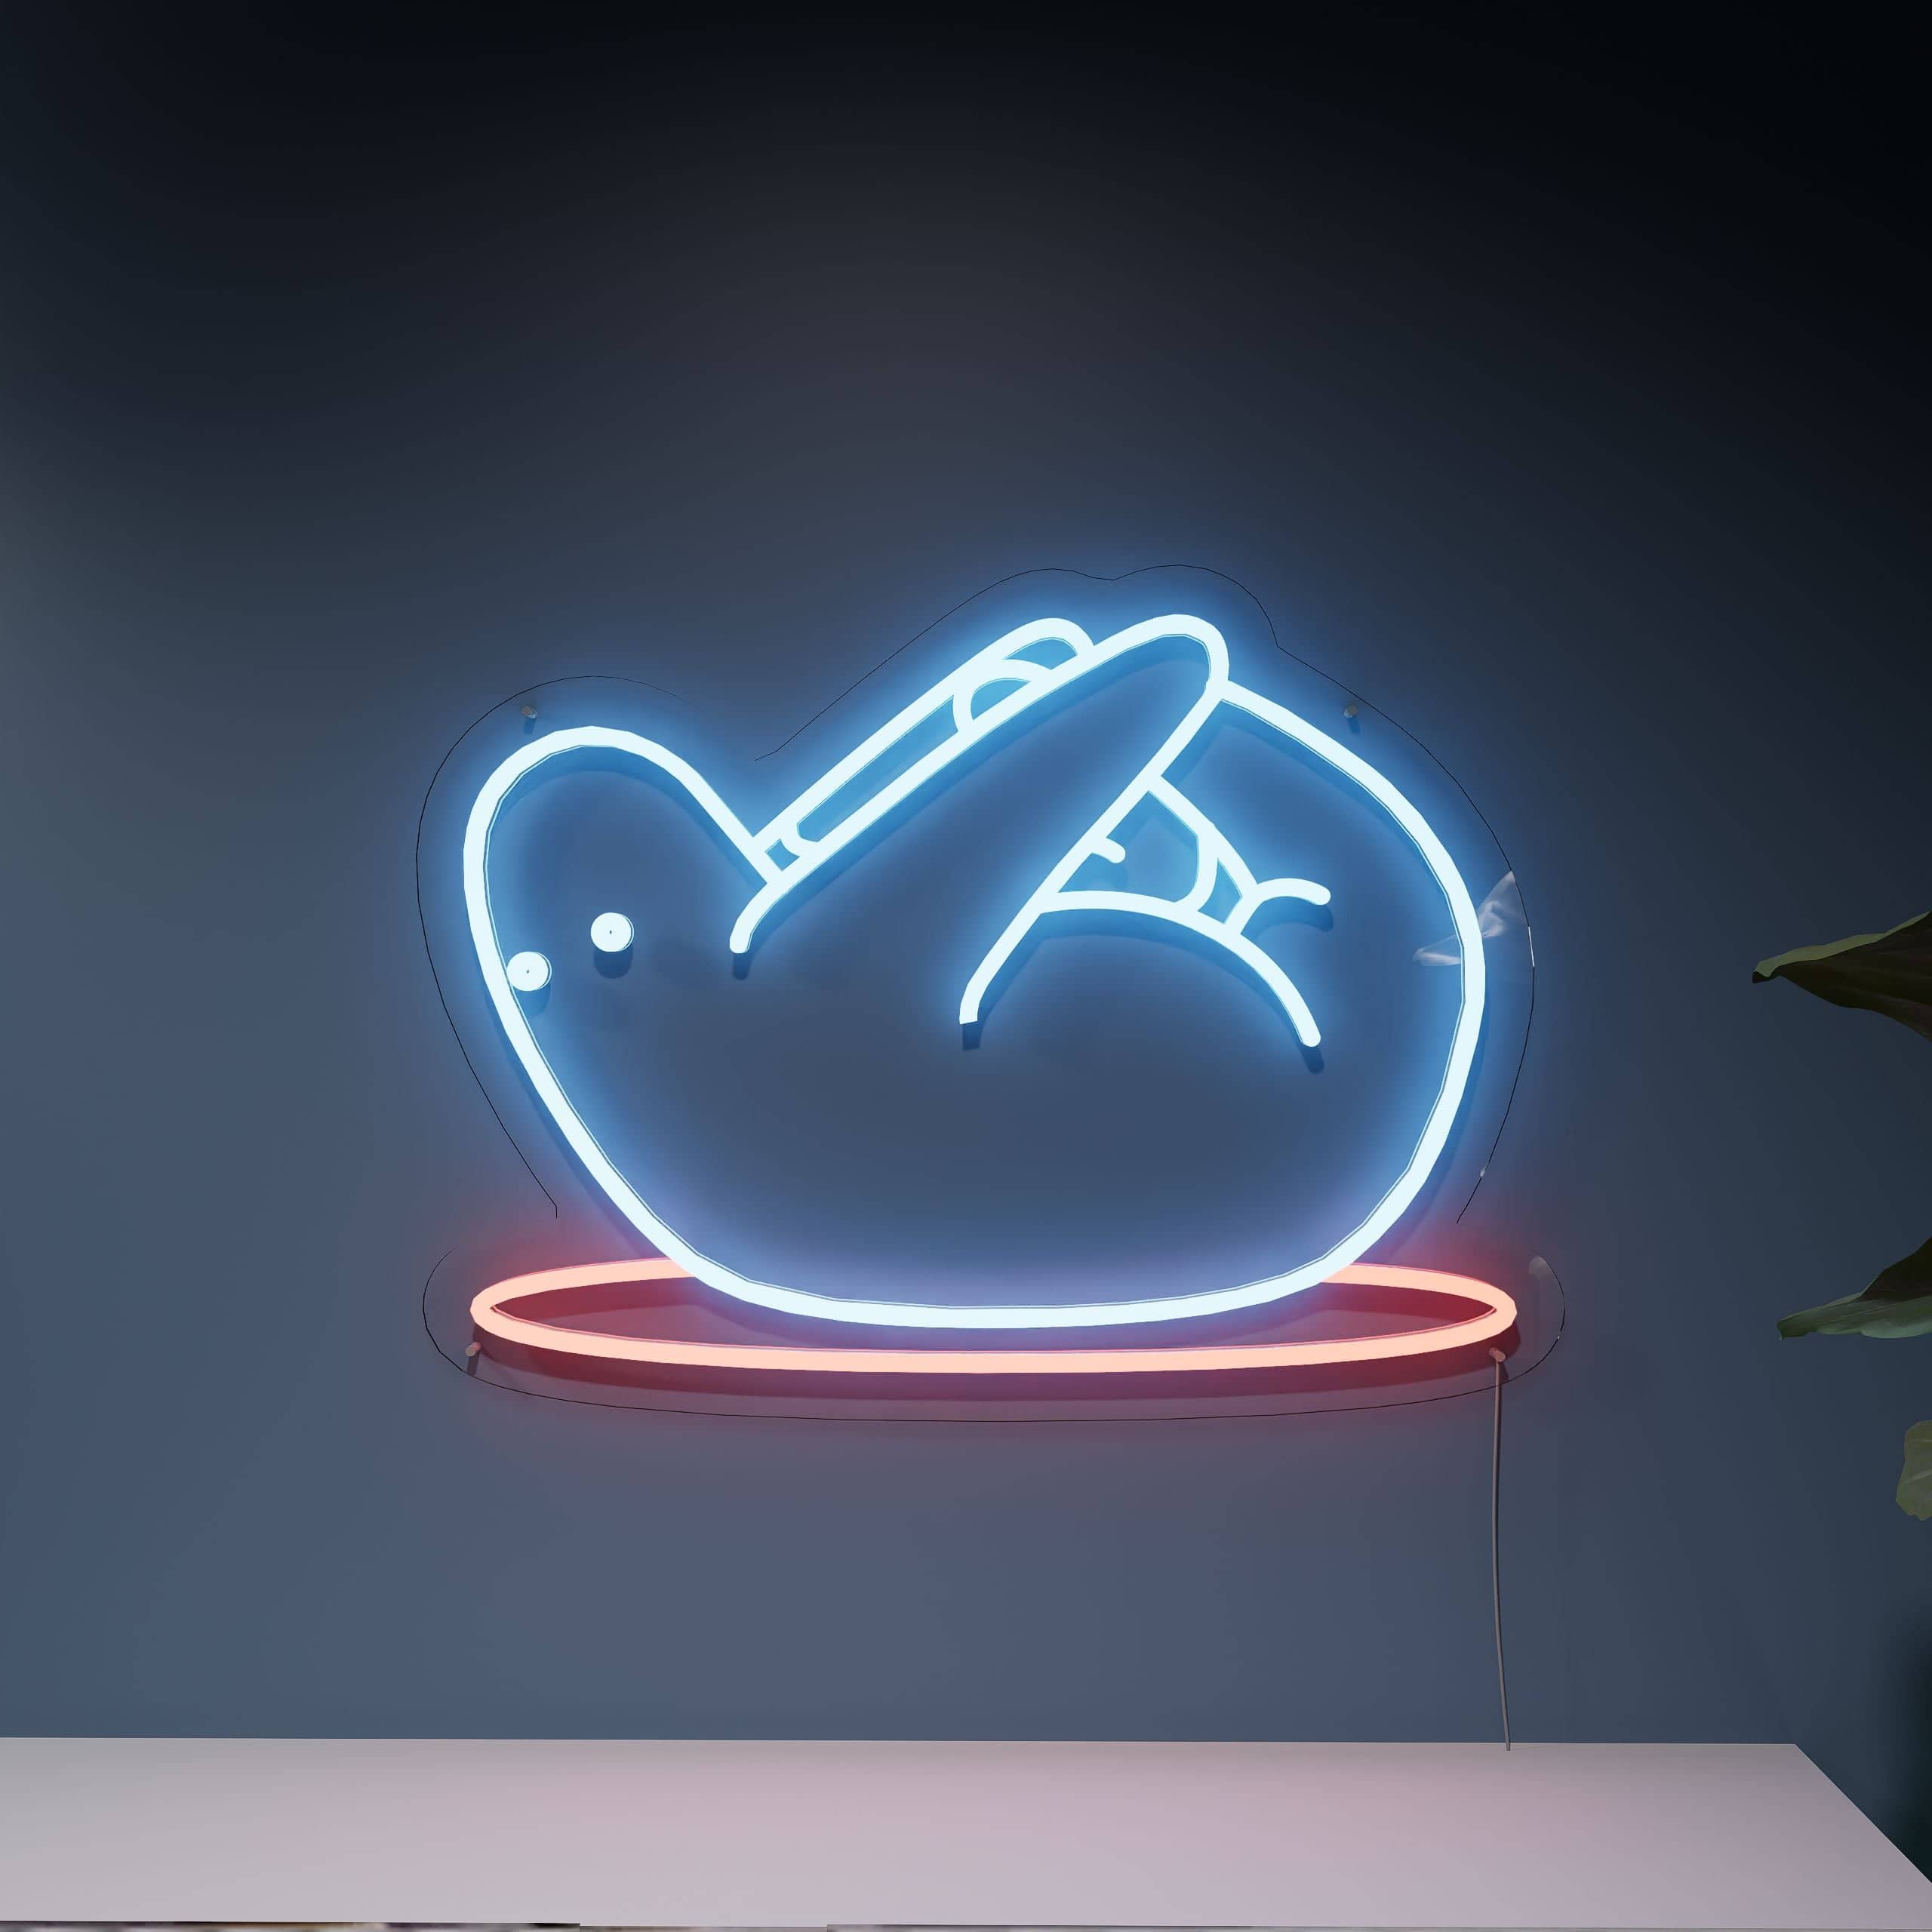 Whimsical Yoga Dance neon sign in fast food venue